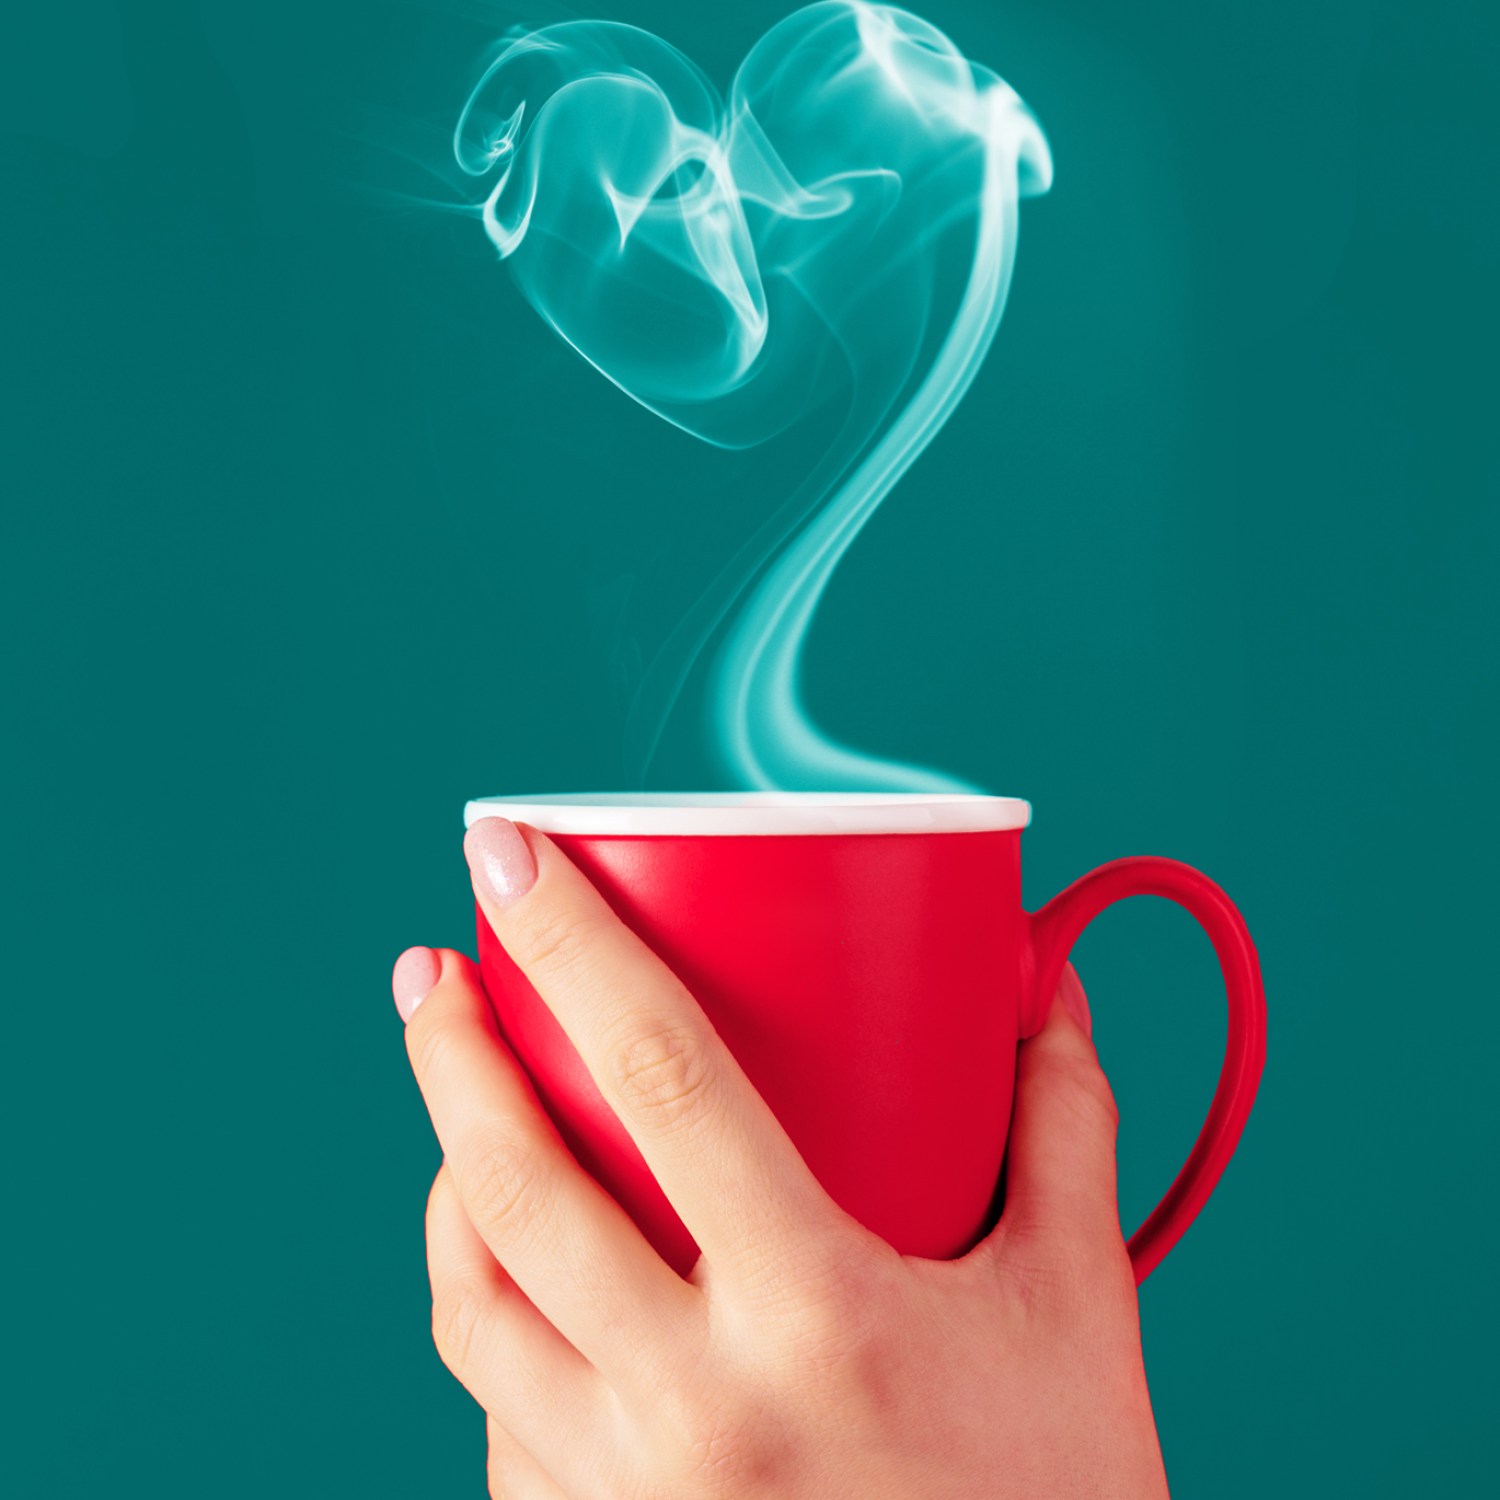 Hand holding red mug with heart-shaped smoke from beverage